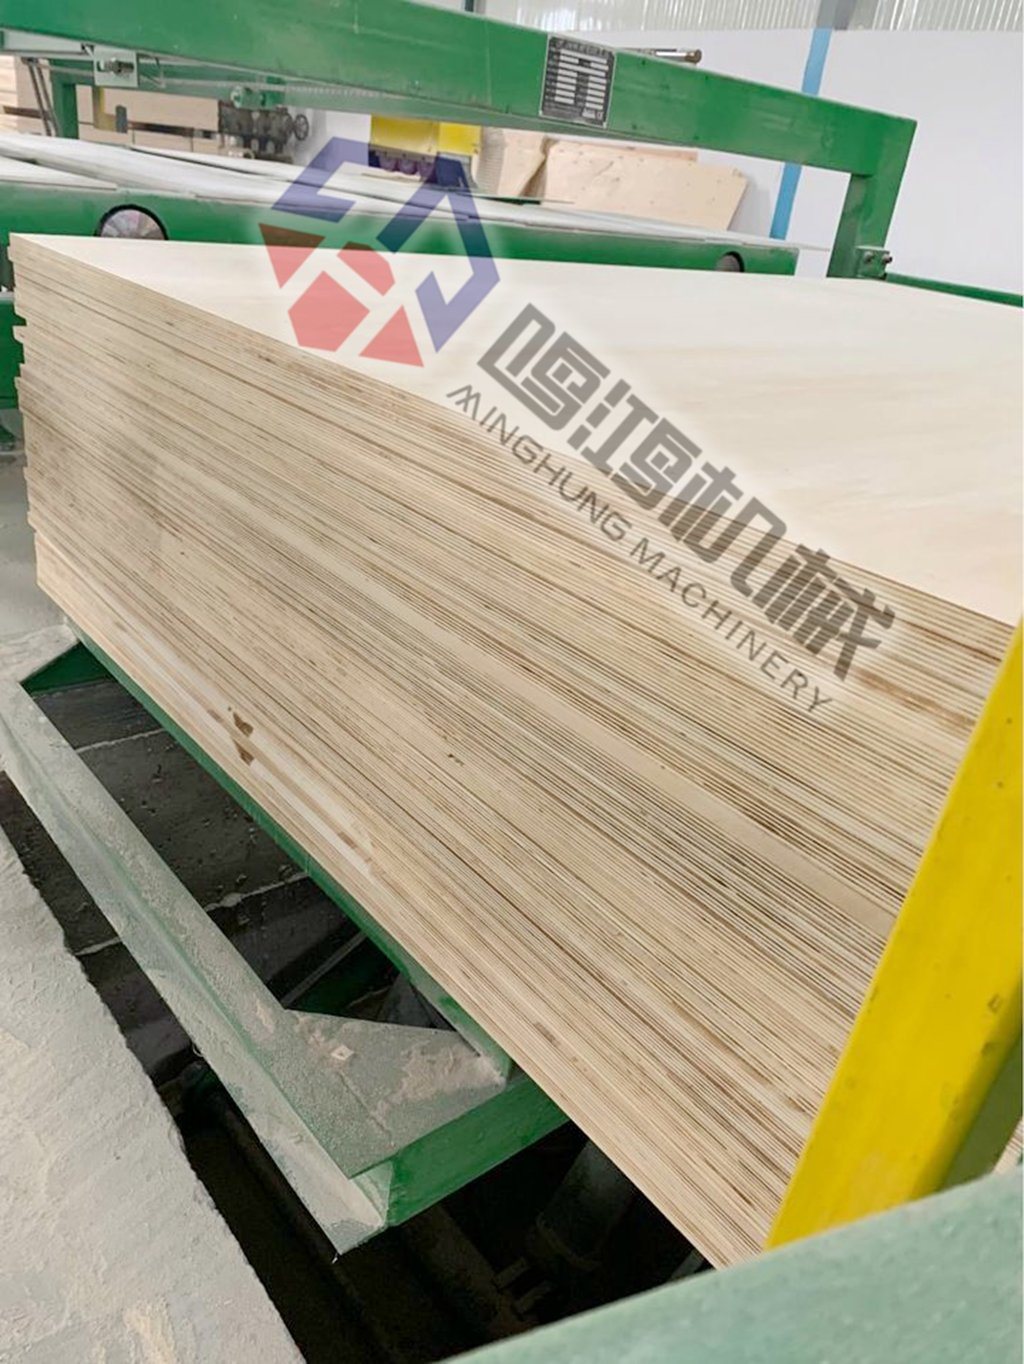 Trimming Saw for Plywood Wood Working Machine